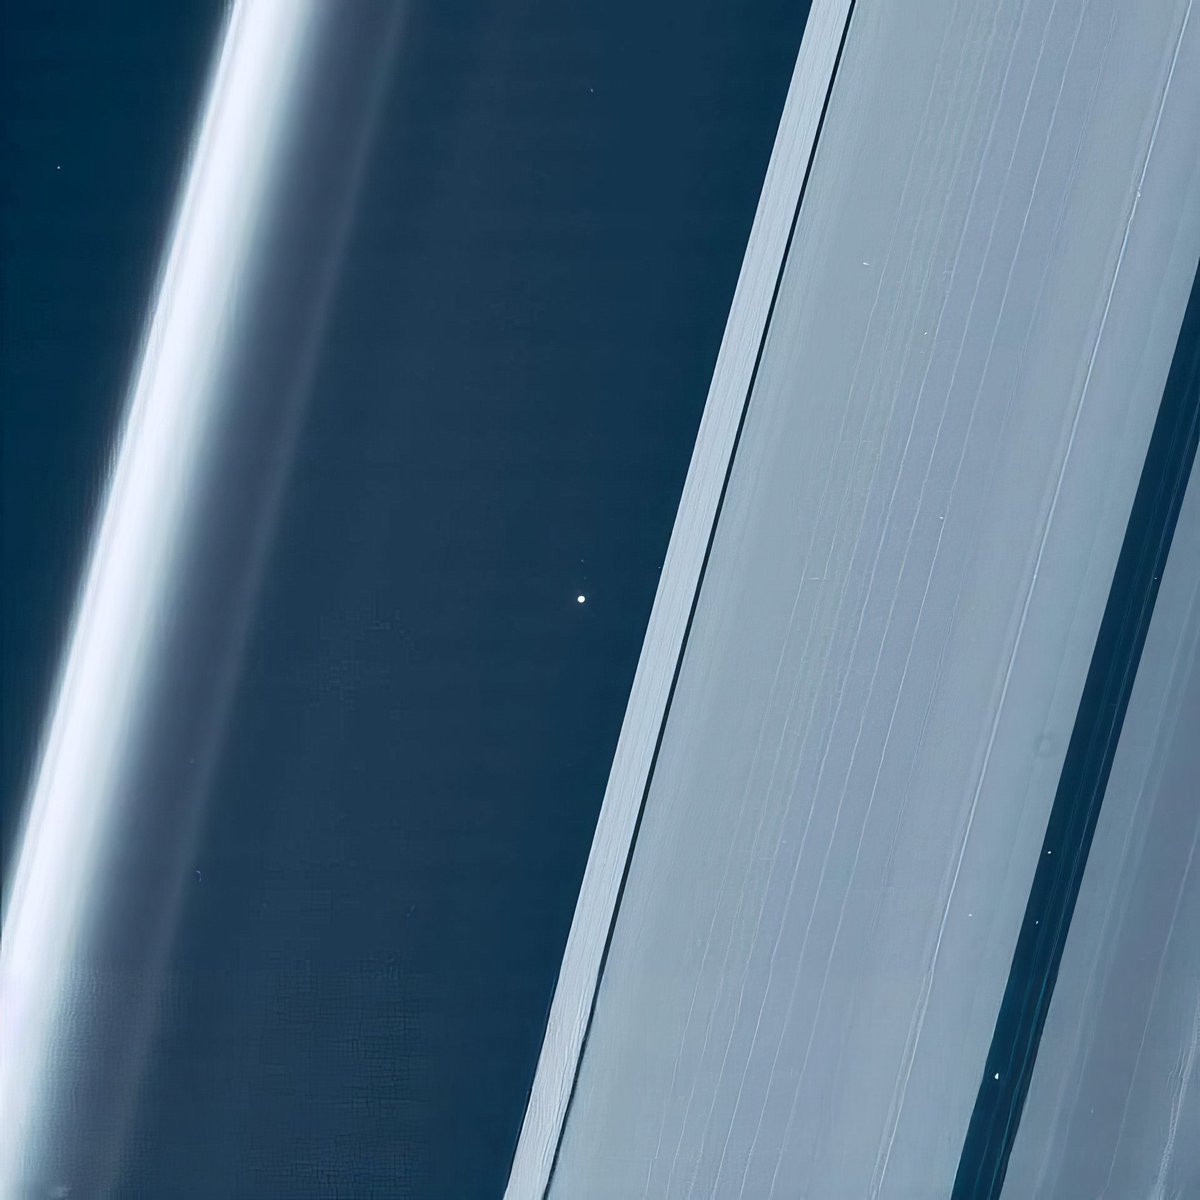 Earth and Moon between the rings of Saturn.